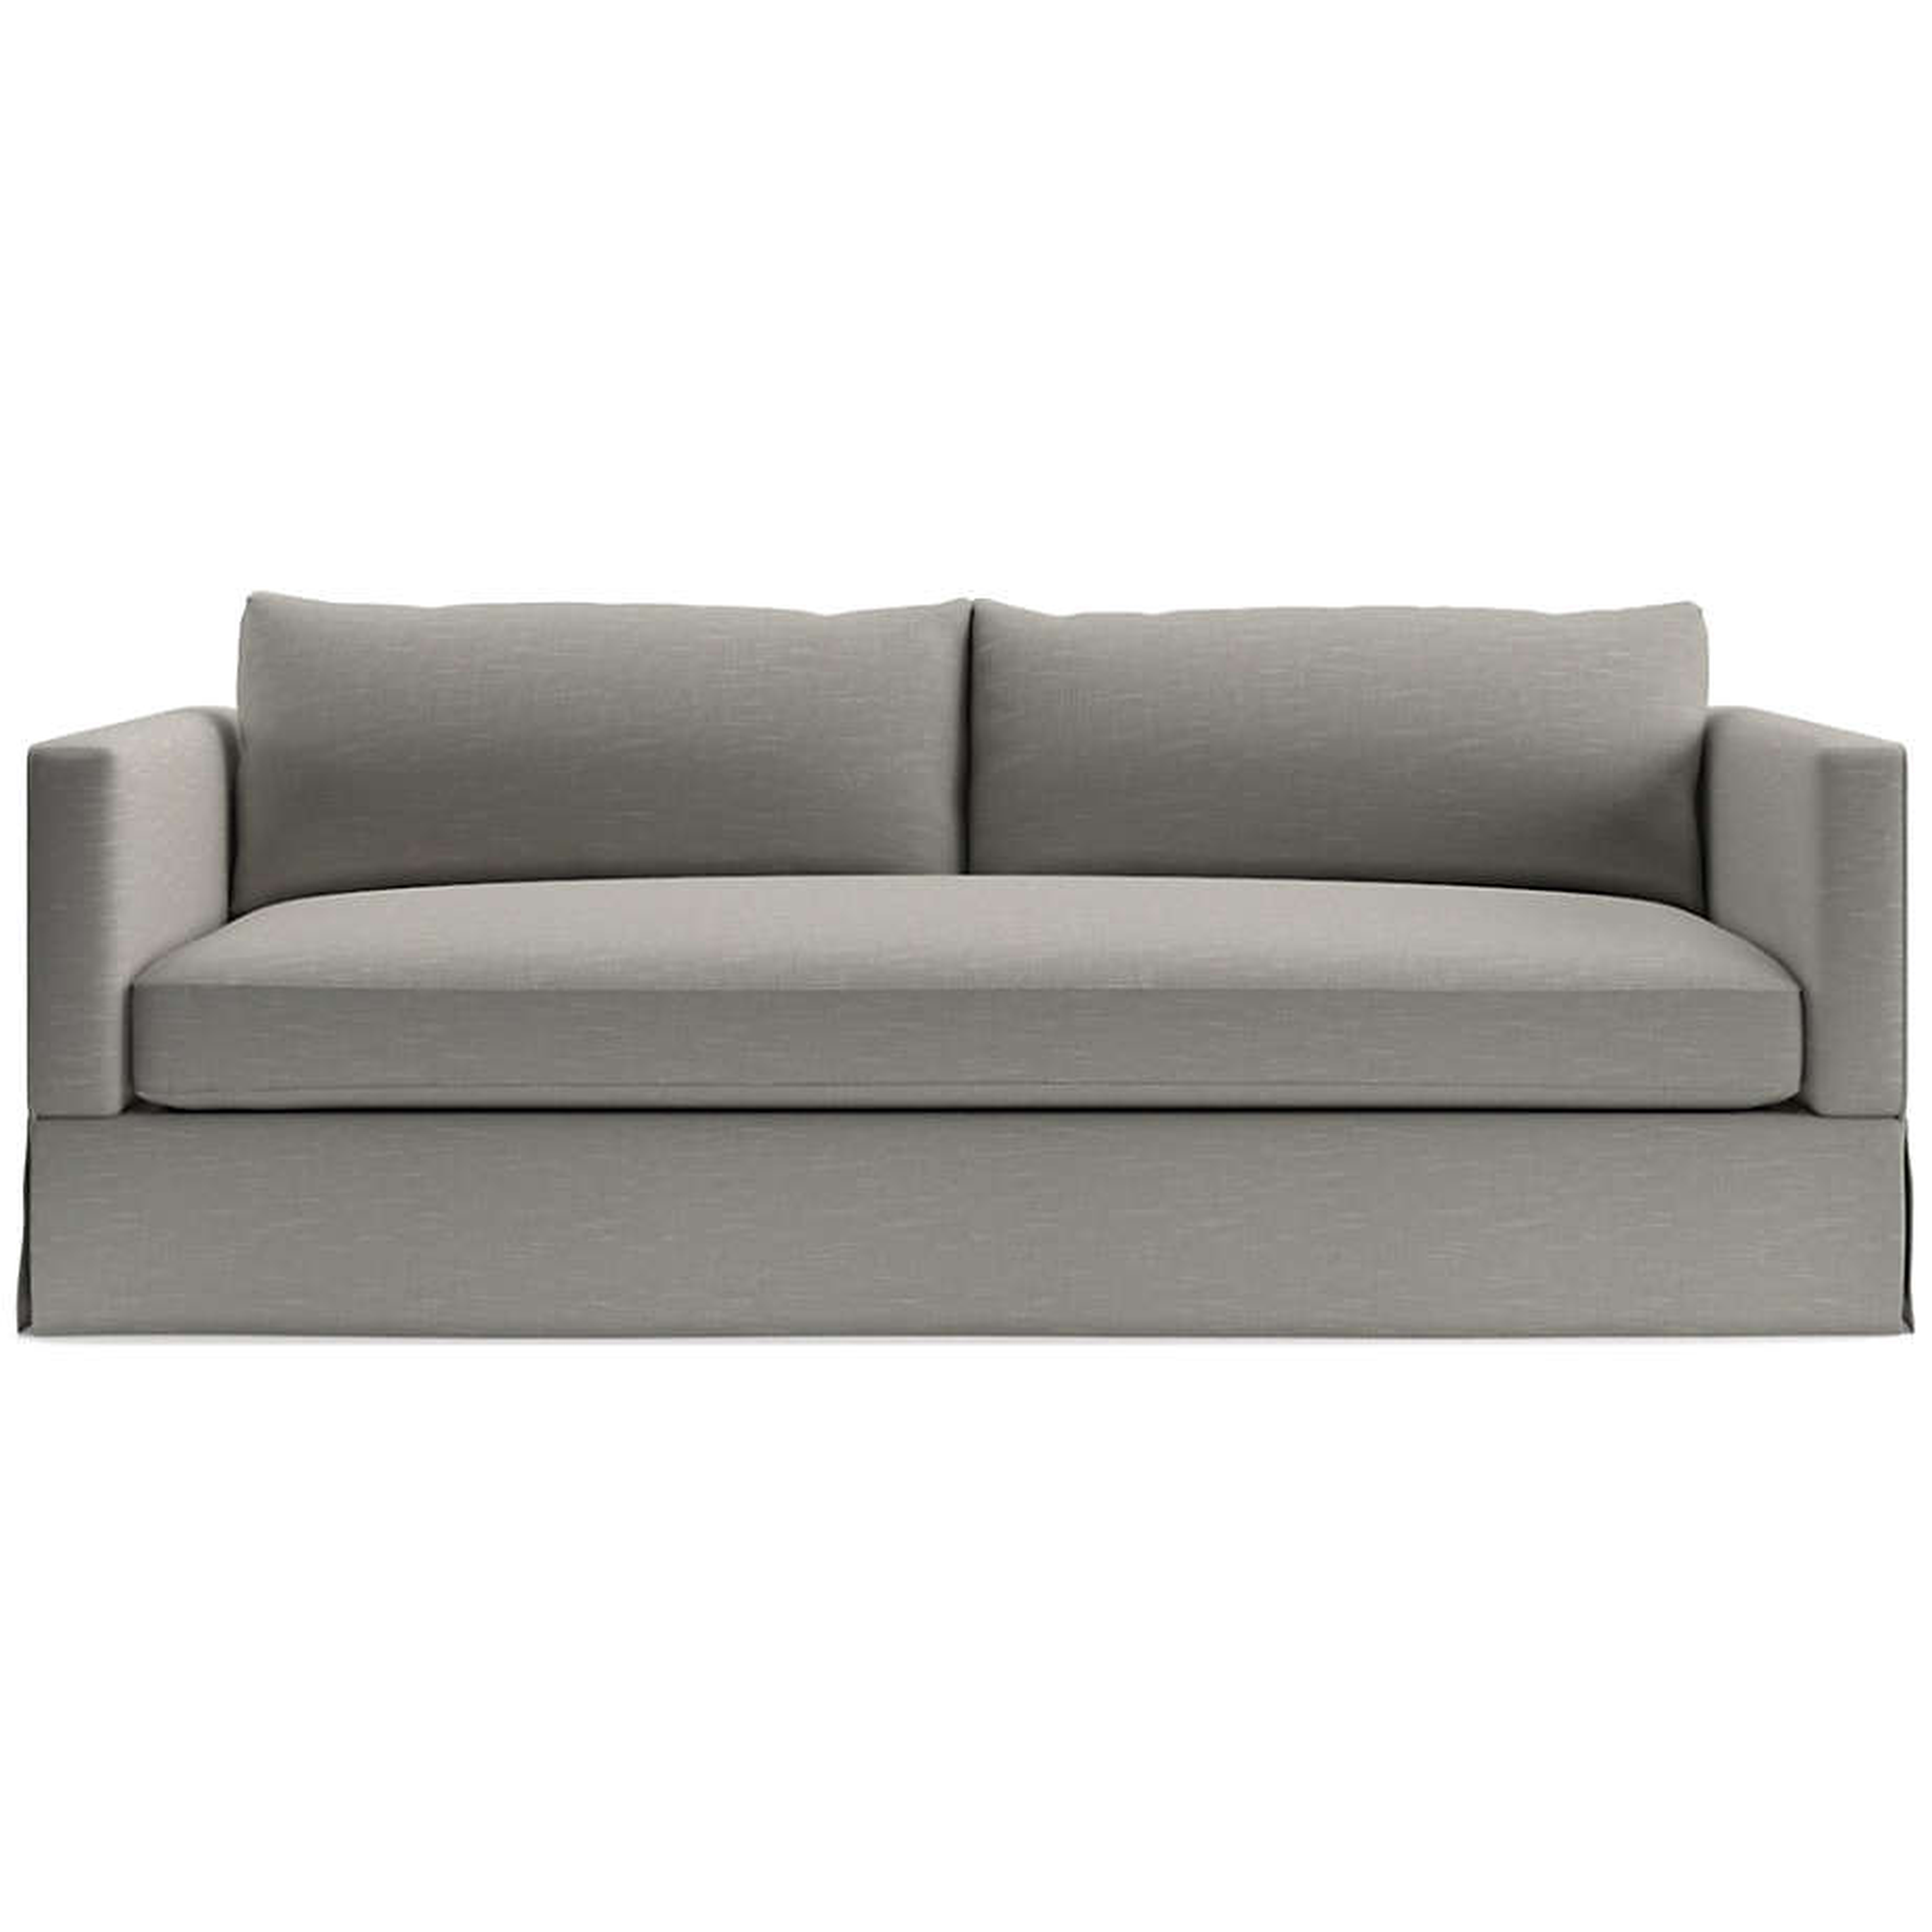 Magritte Queen Sleeper Sofa - Crate and Barrel